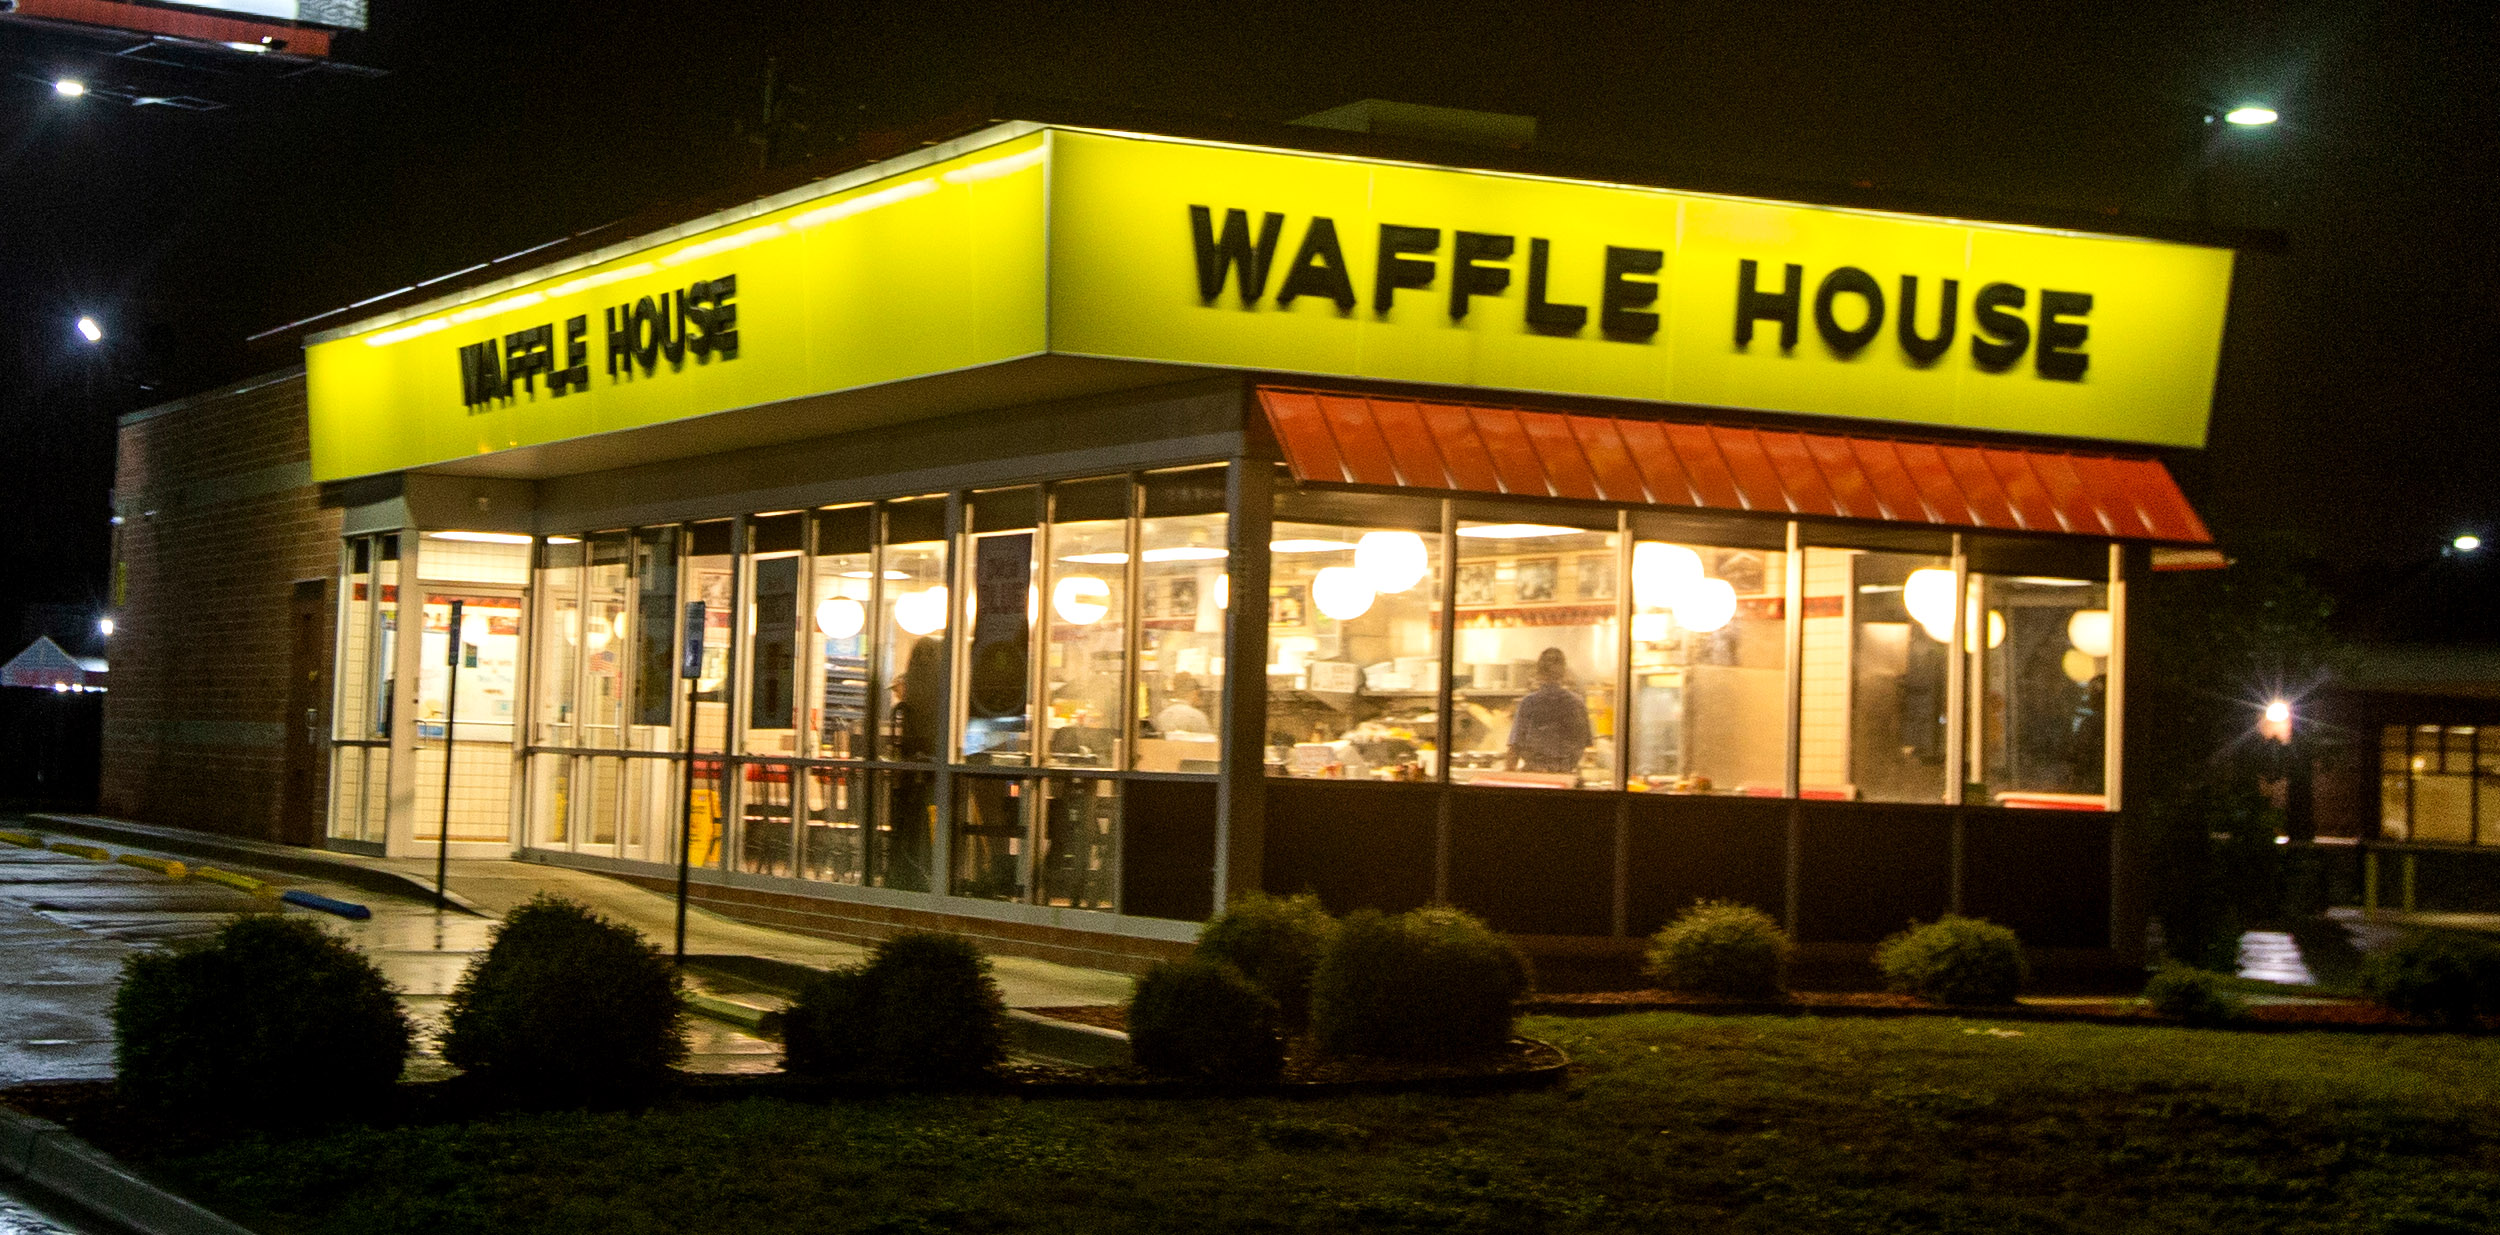 Over 400 Waffle House Locations Have Been Closed Due To The Pandemic